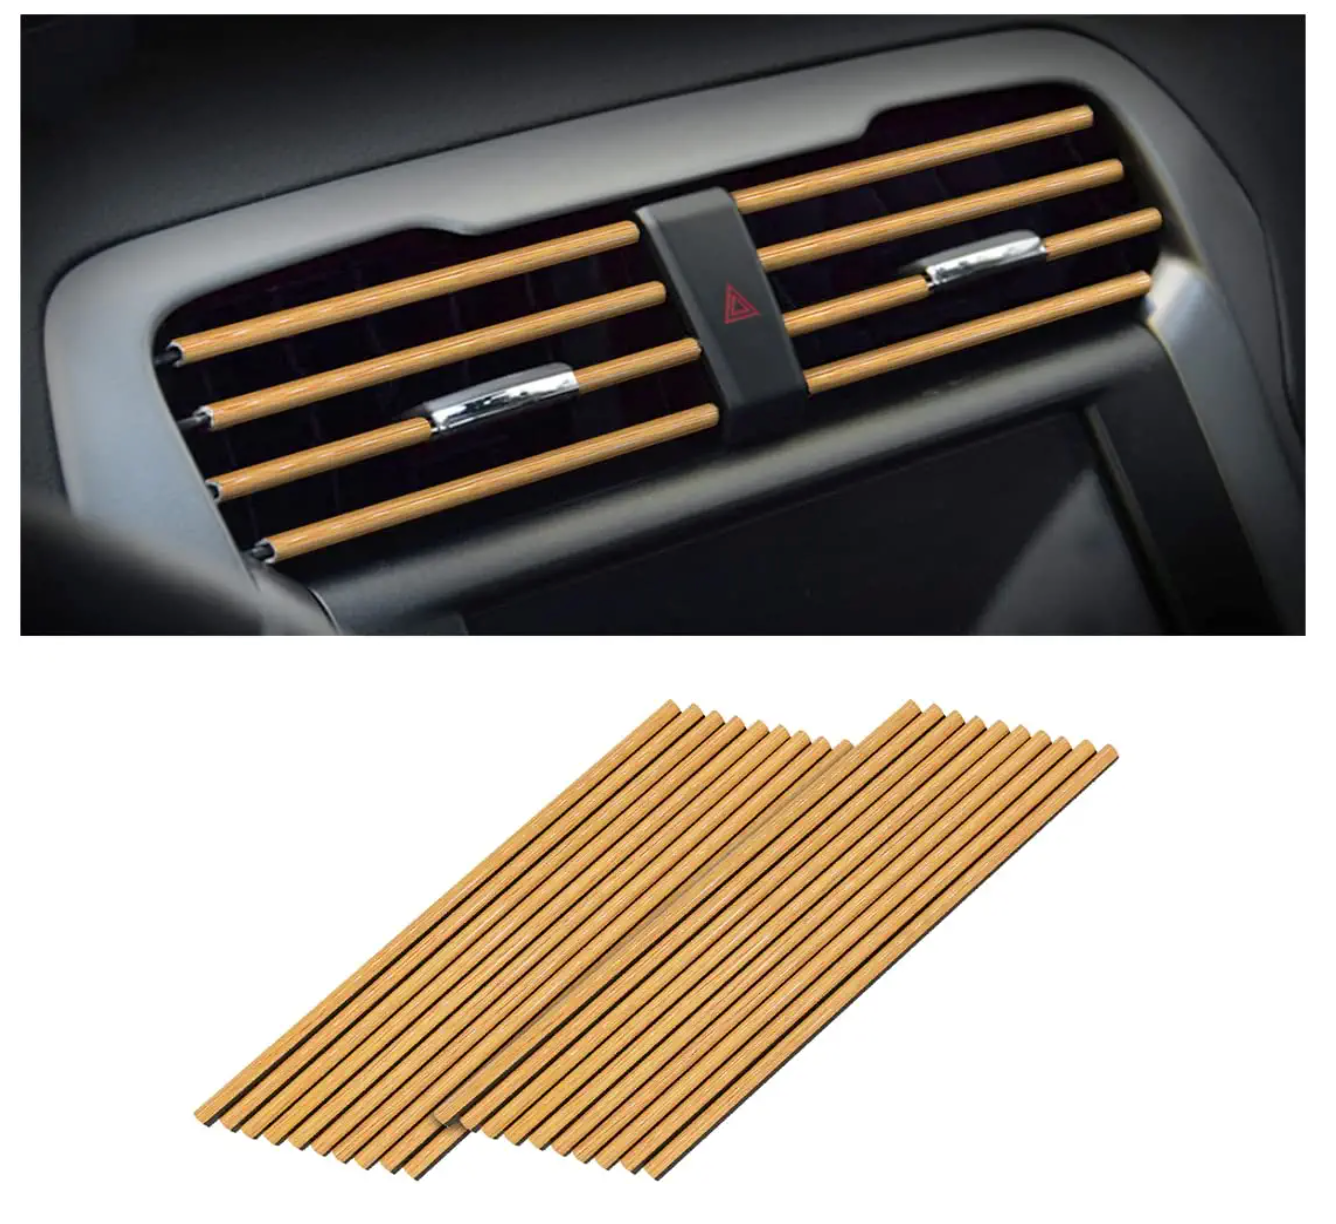 Car Air Conditioner Decoration Strip 8sanlione for Vent Outlet, Universal Waterproof Bendable Air Vent Outlet Trim Decoration (20 Pieces)